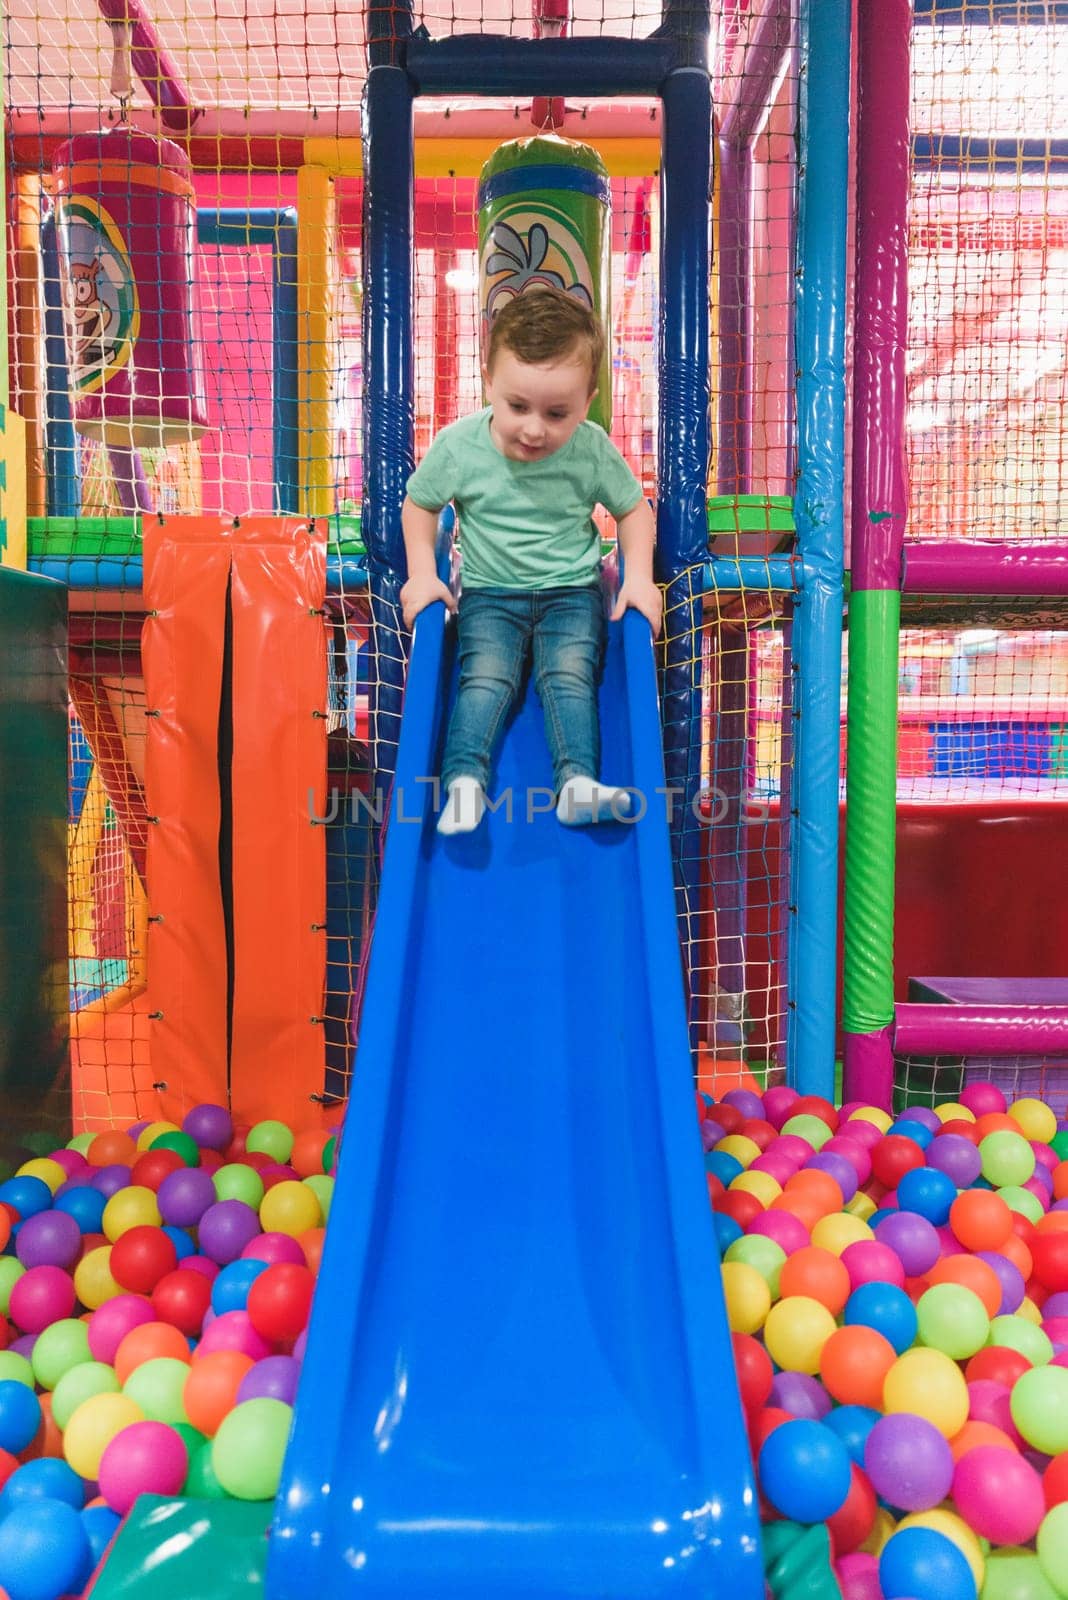 Cheerful boy playing in slide and pool with colorful balls.